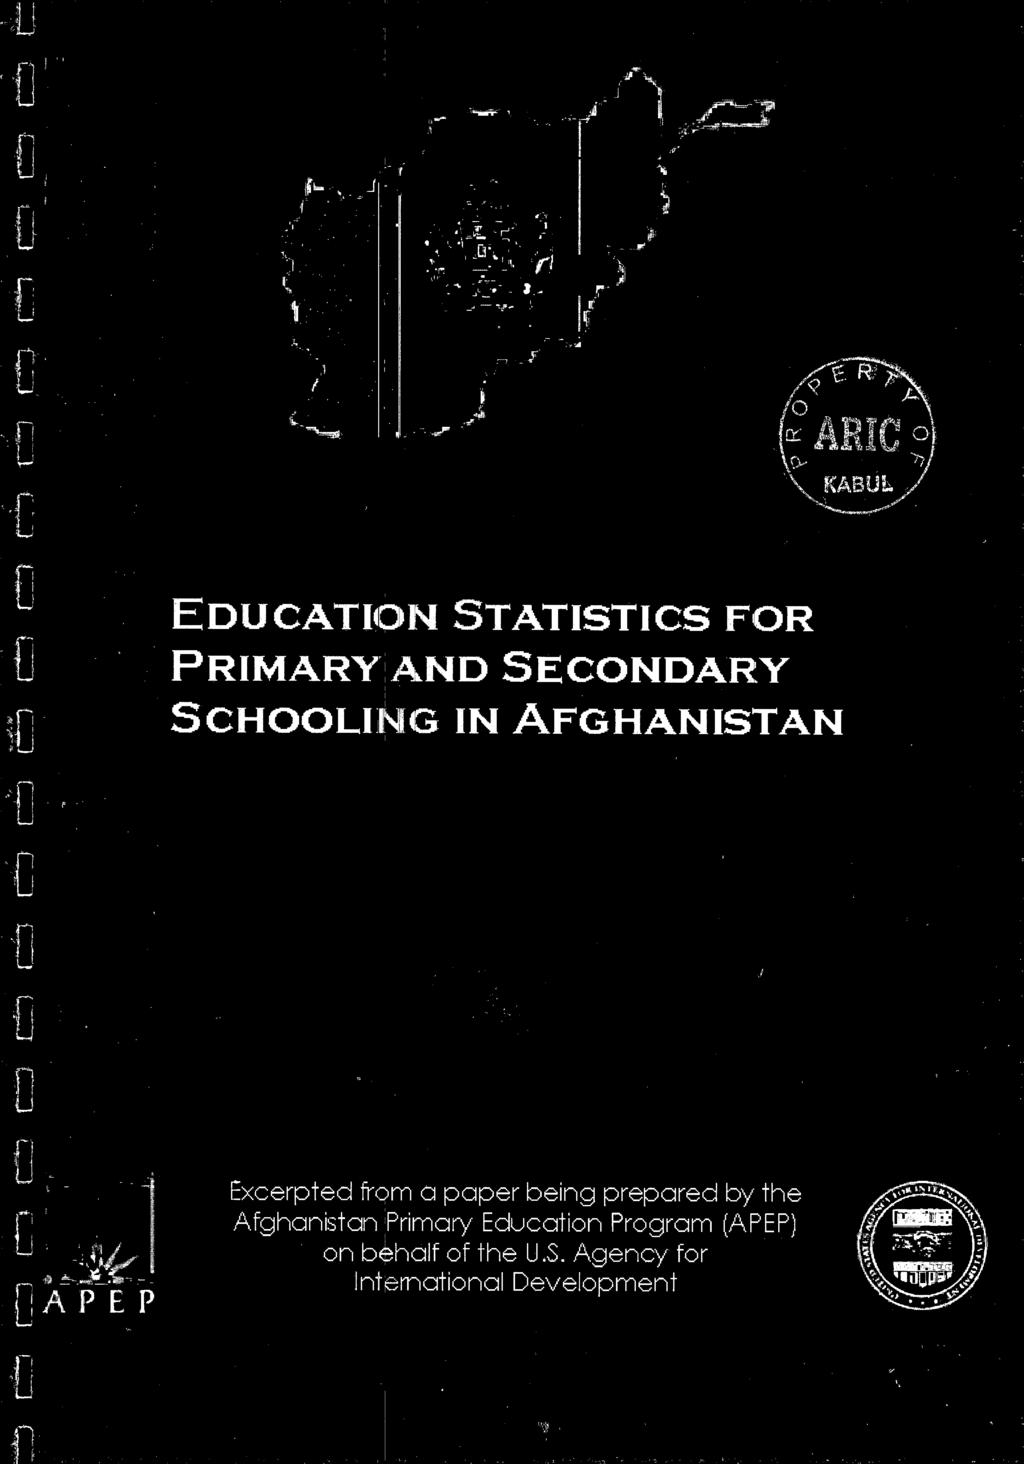 the Afghanistan Primary Education Program (APEP) on